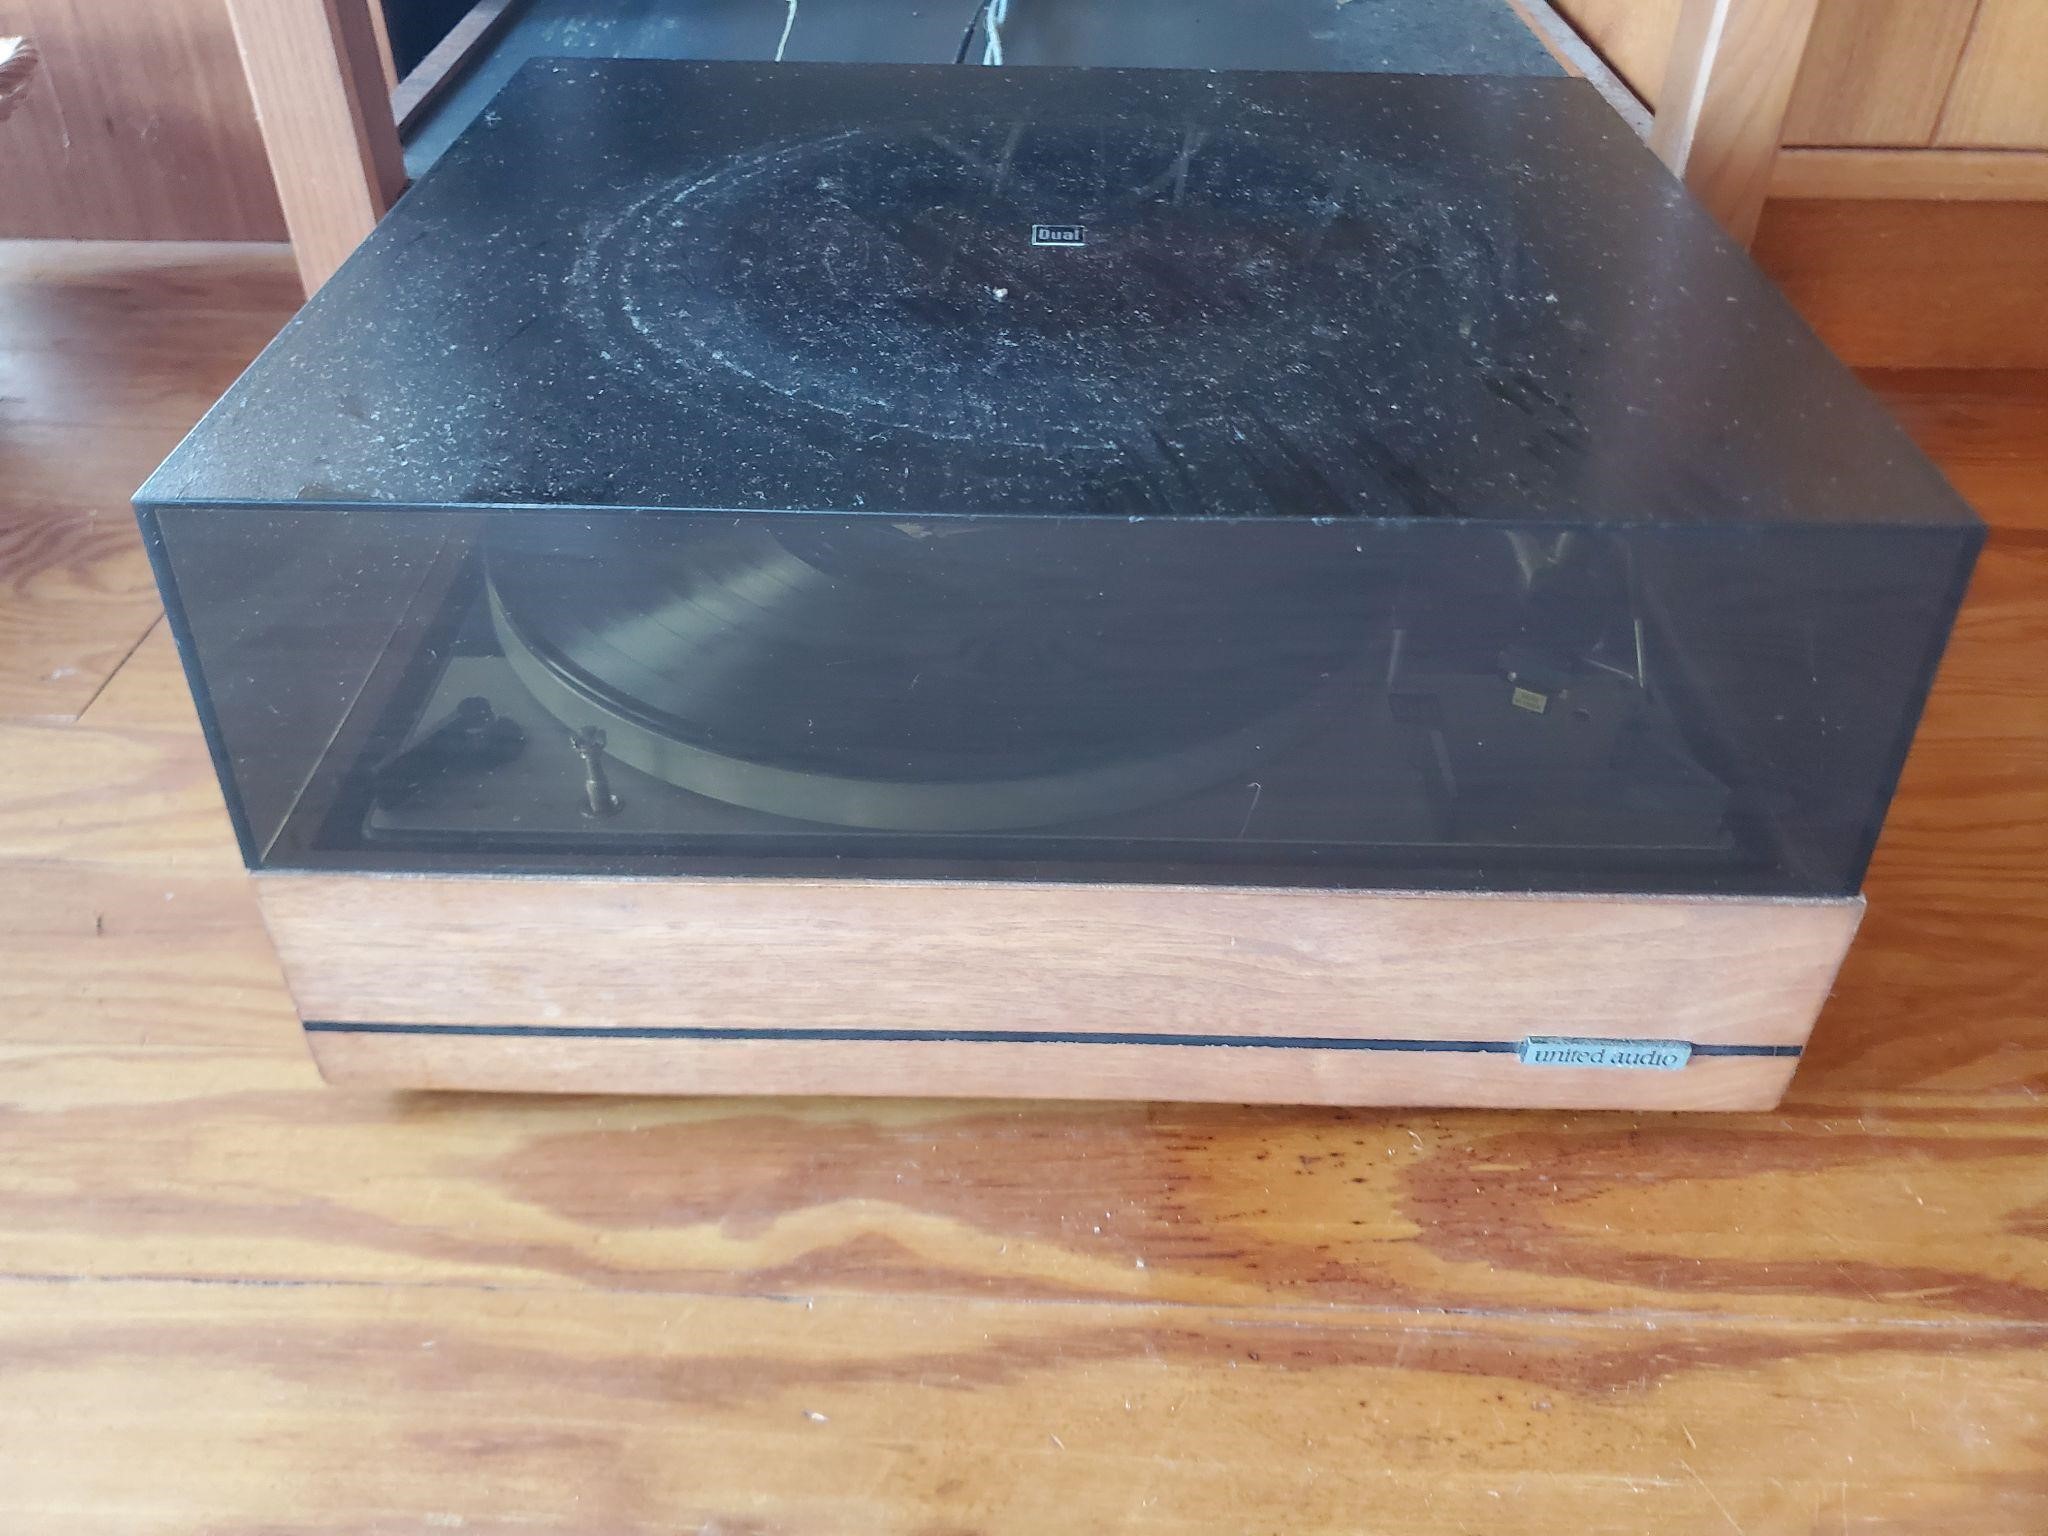 United Audio turntable not tested